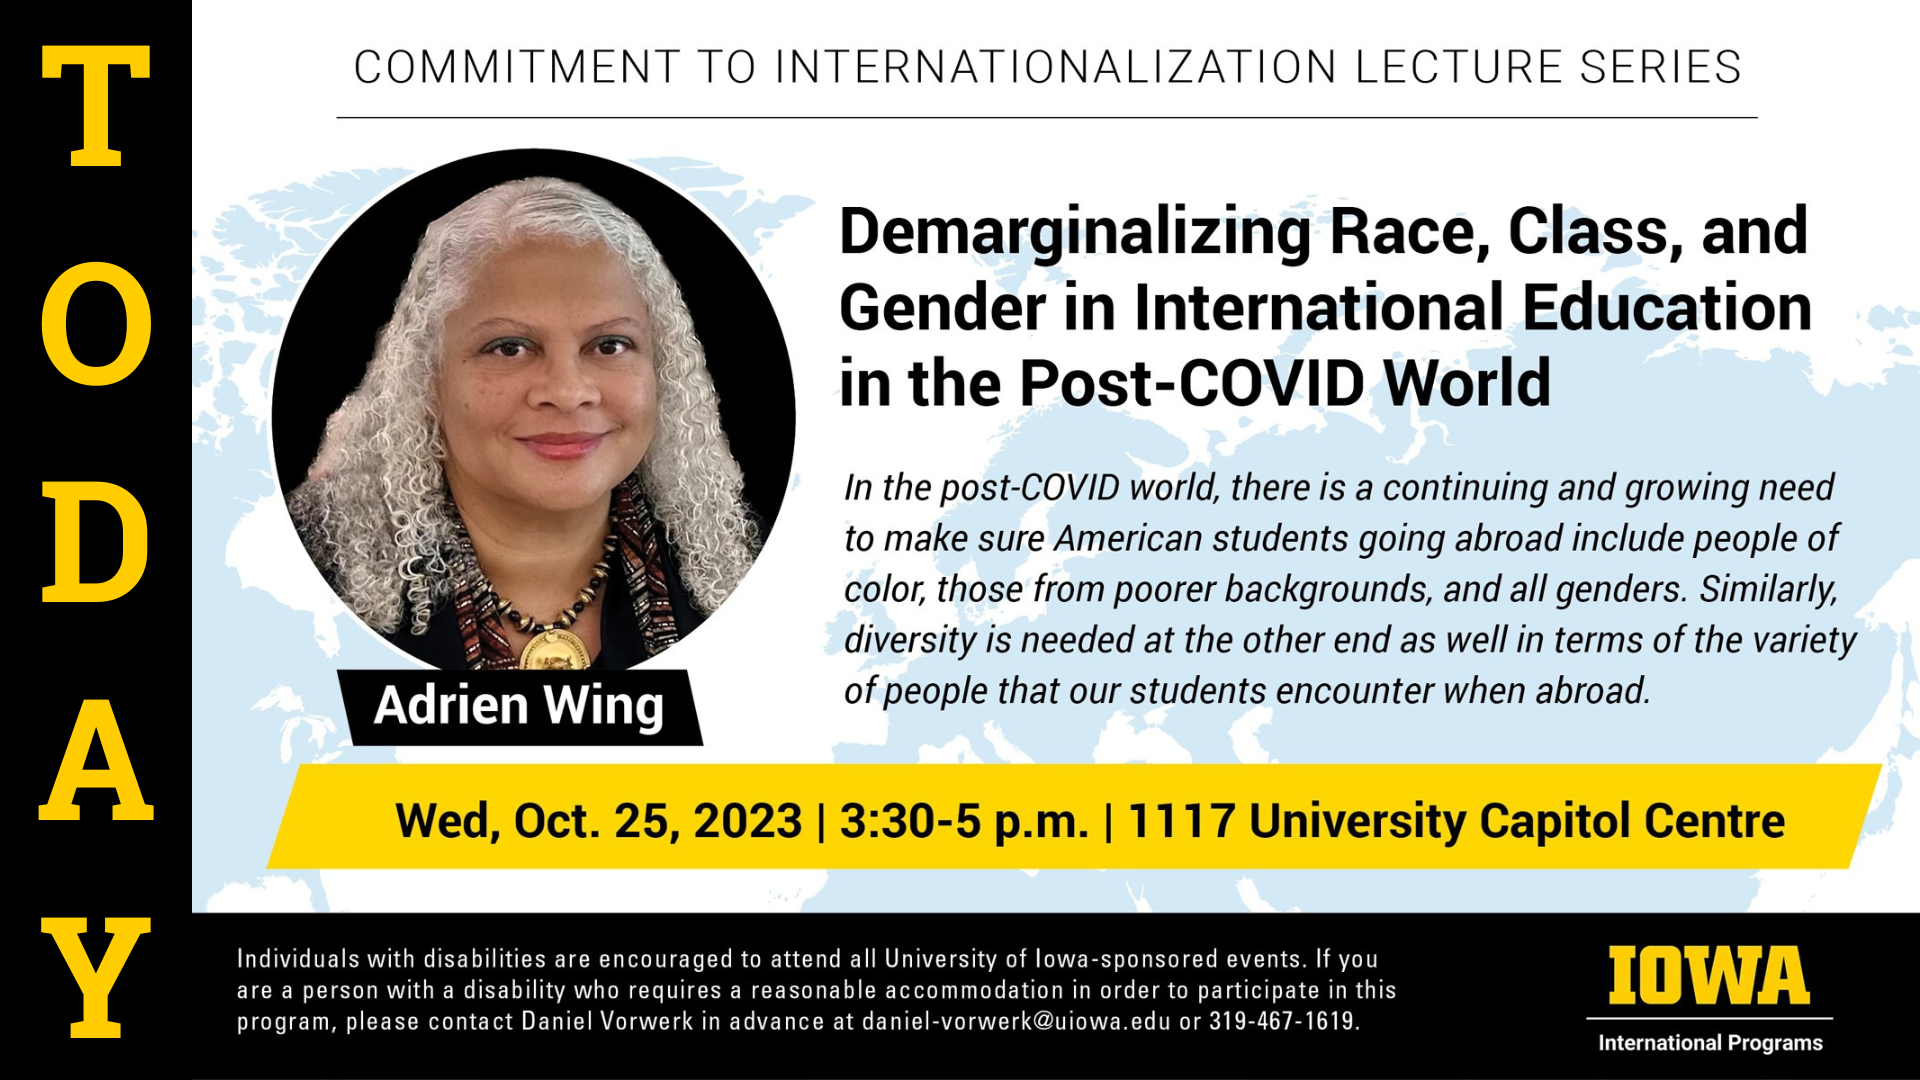 Today, October 25, 3:30-5pm in 1117 University Capitol Centre! Adrien Wing speaks on demarginalizing race, class, and gender in international education in the post-COVID world. 